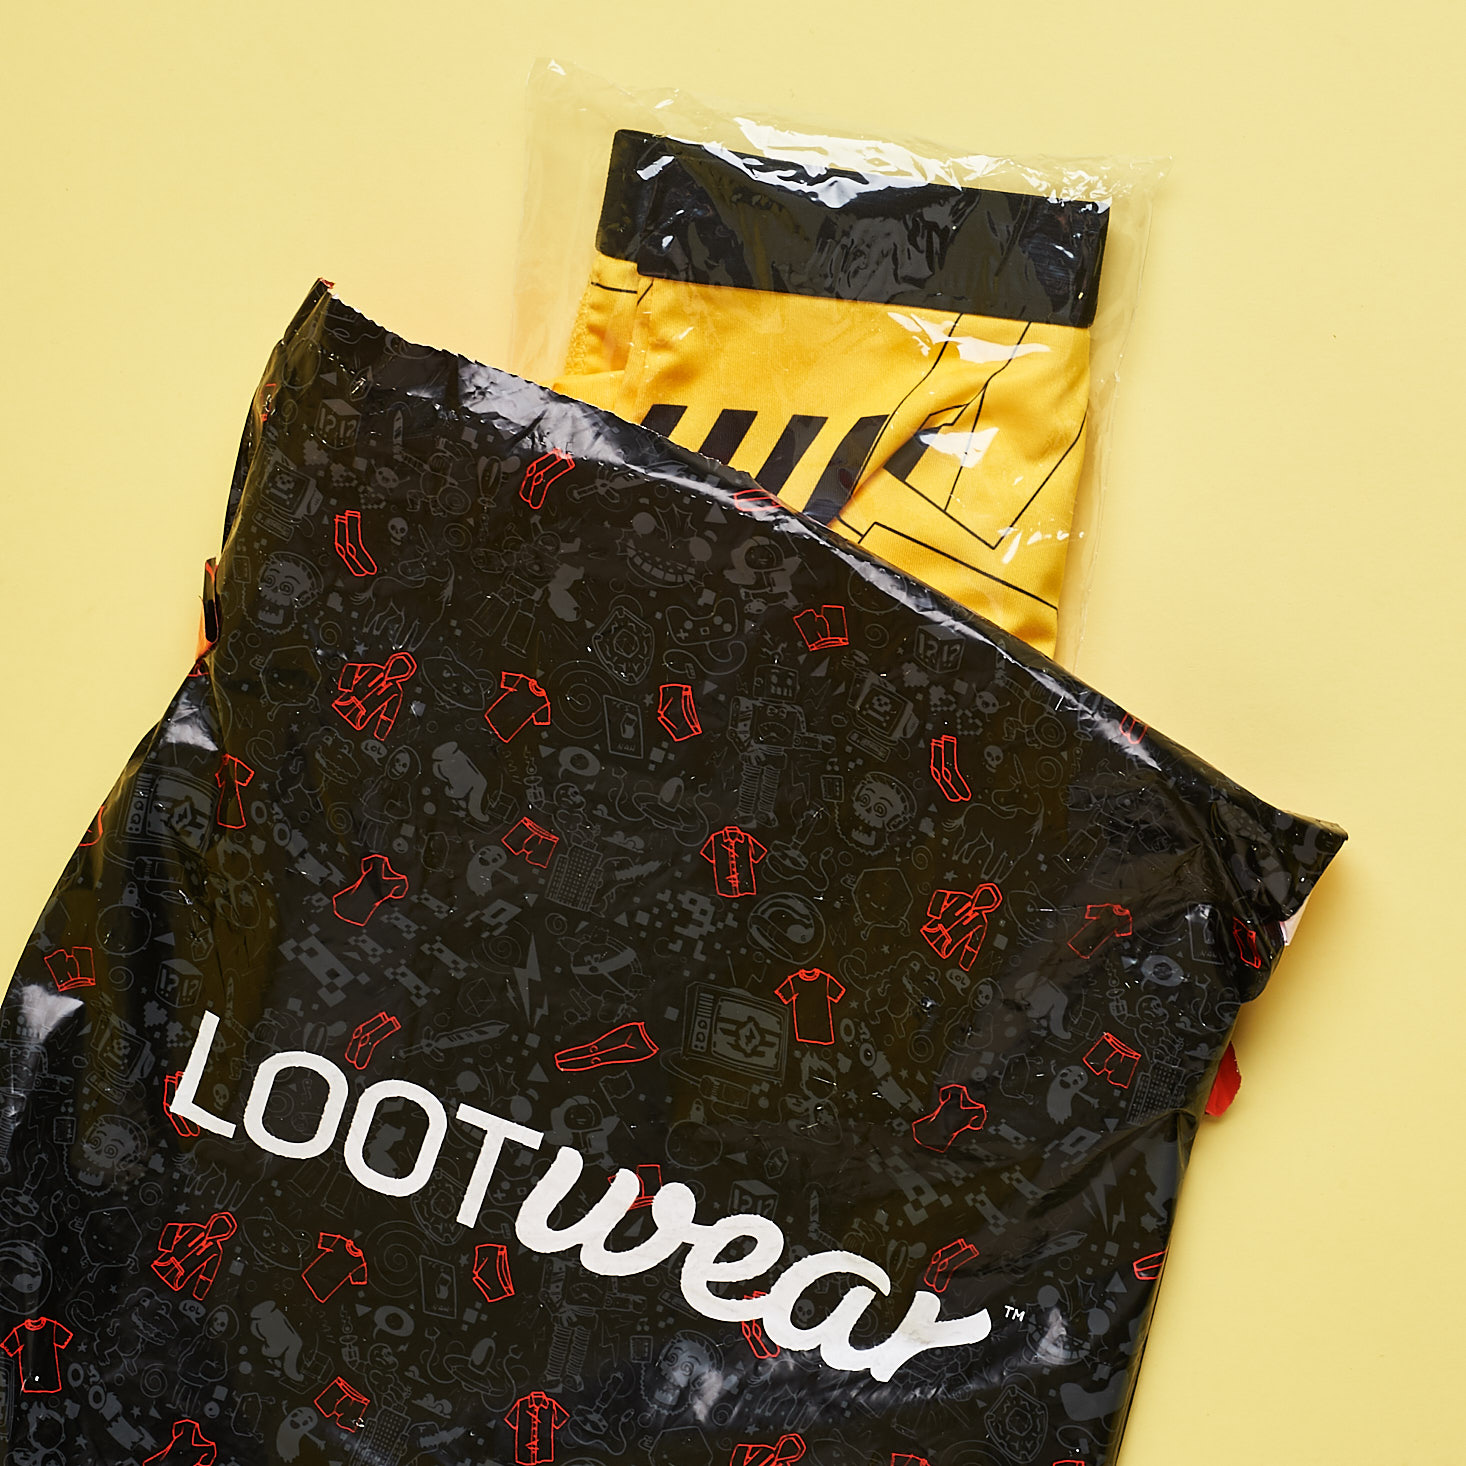 Loot Undies Subscription by Loot Crate Review – March 2018